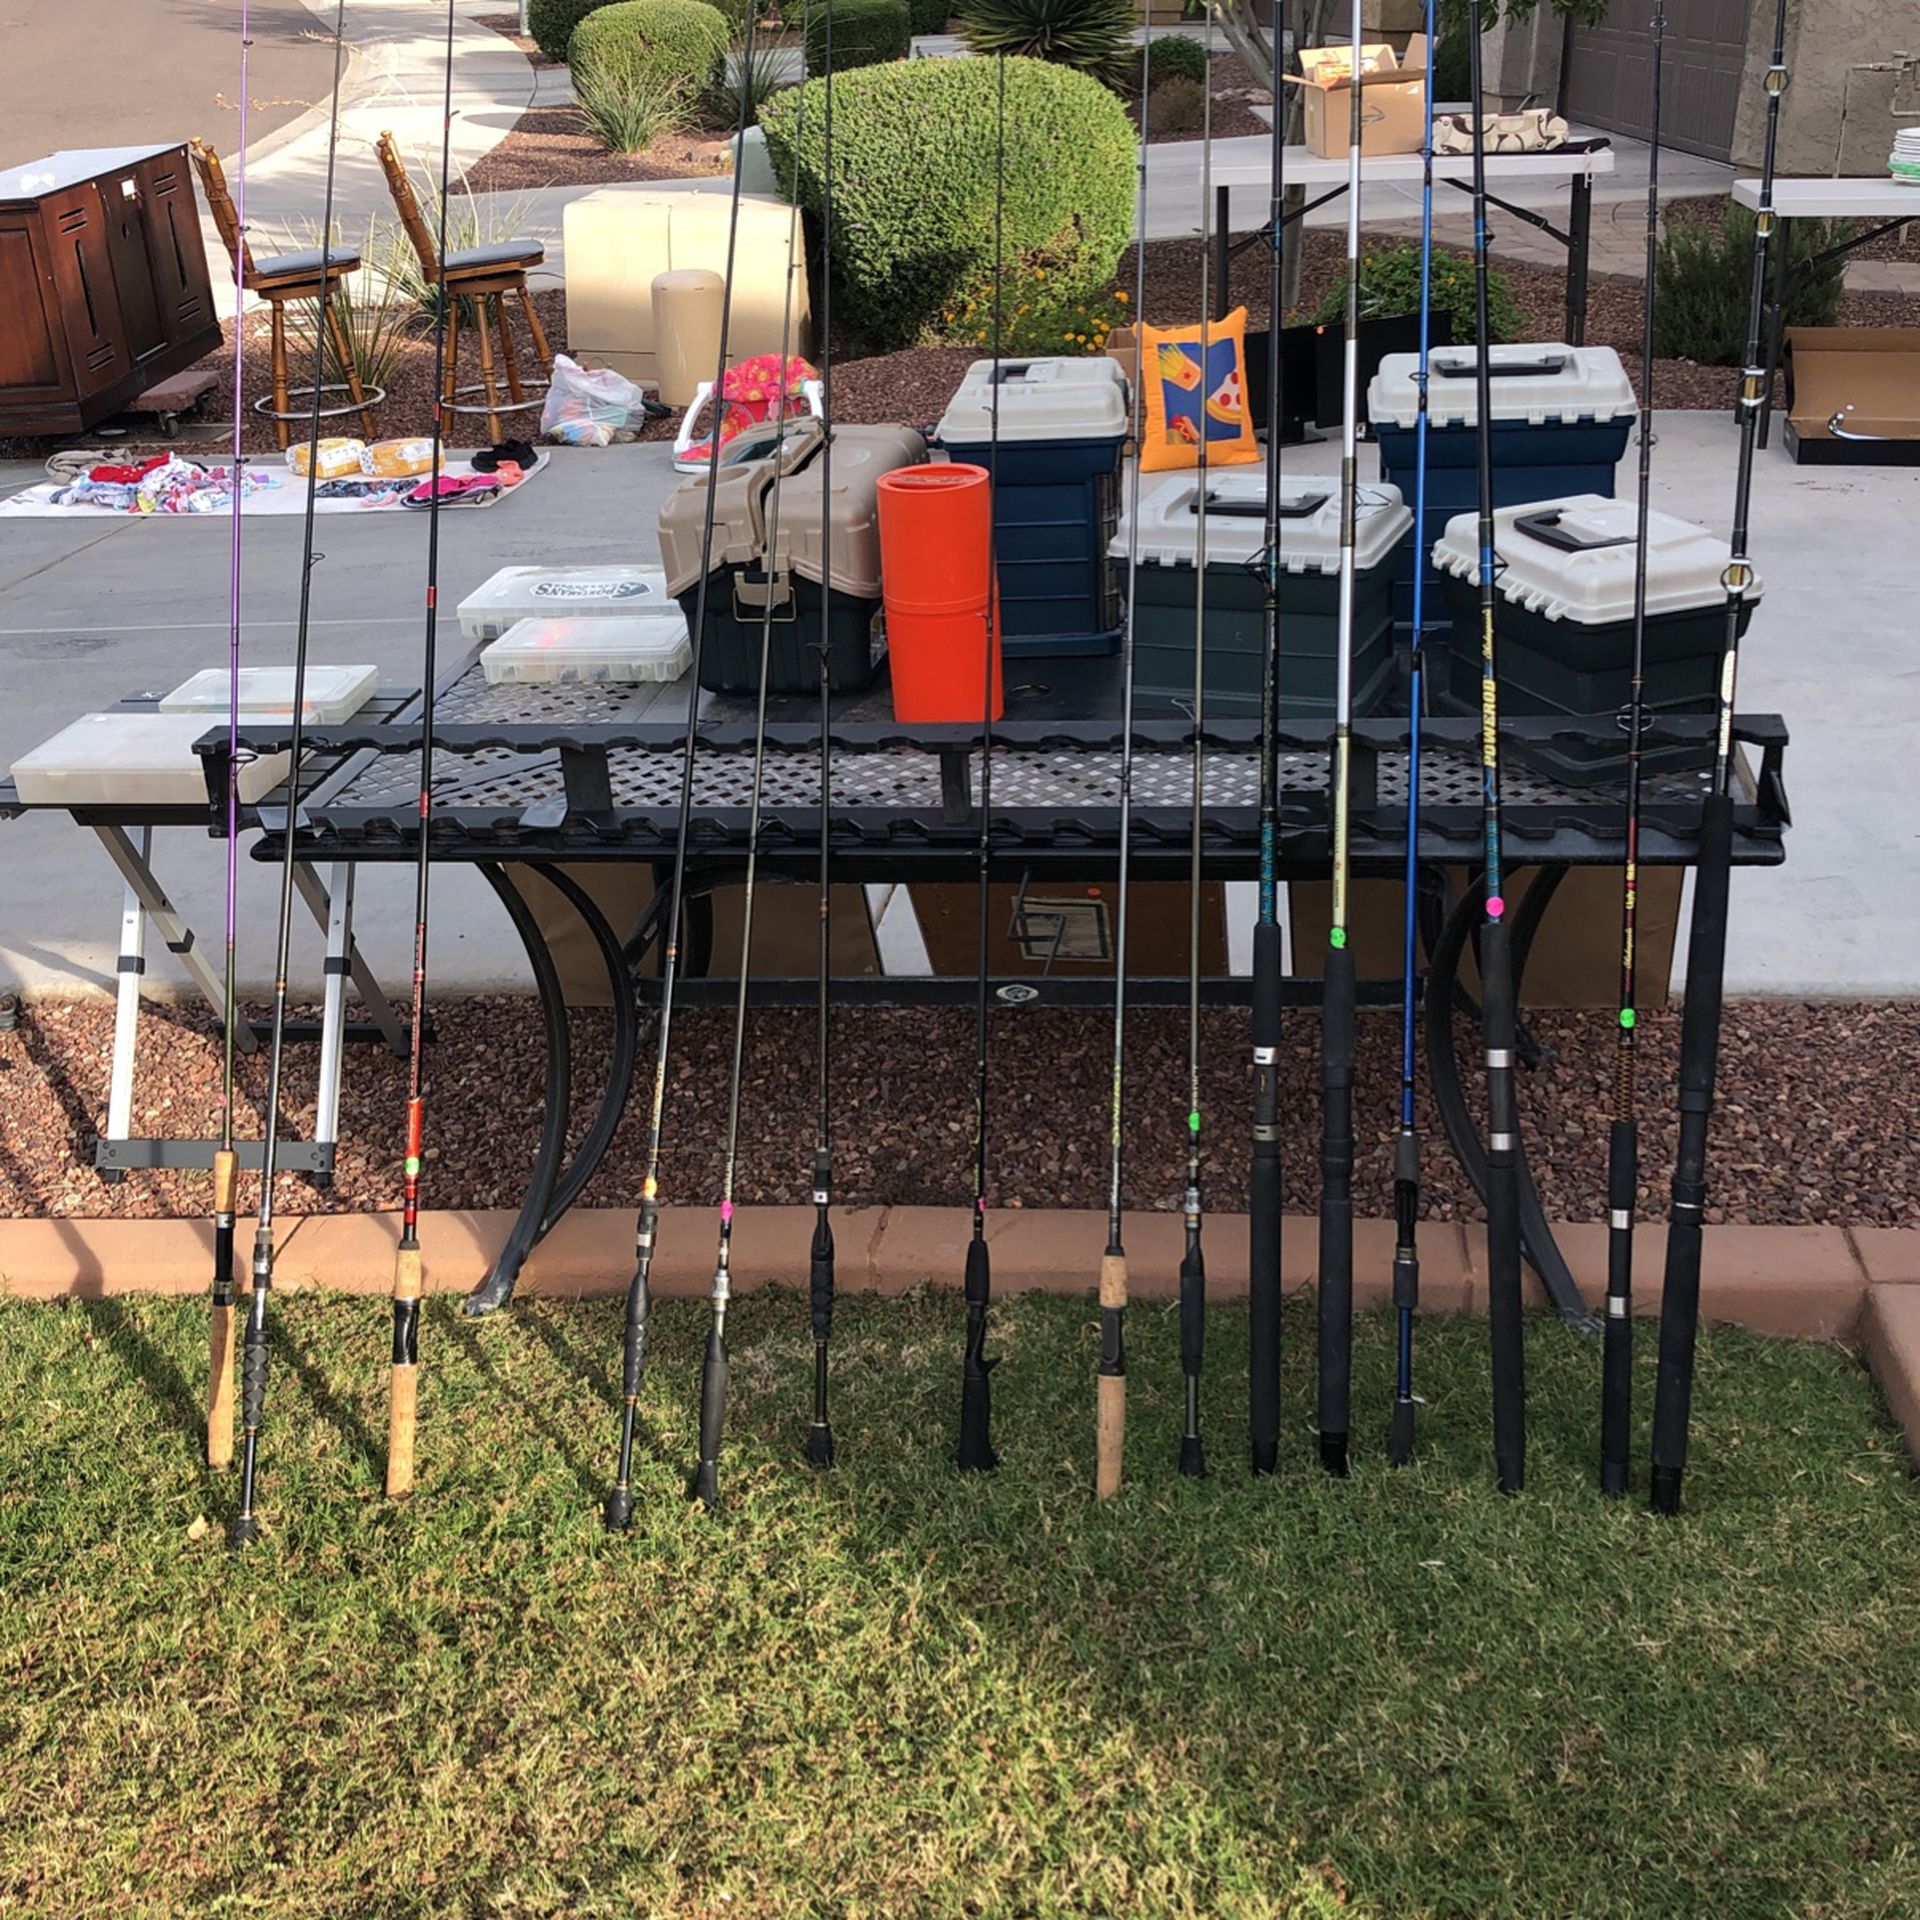 Fishing Poles And Fishing Tackle Boxes Filled 